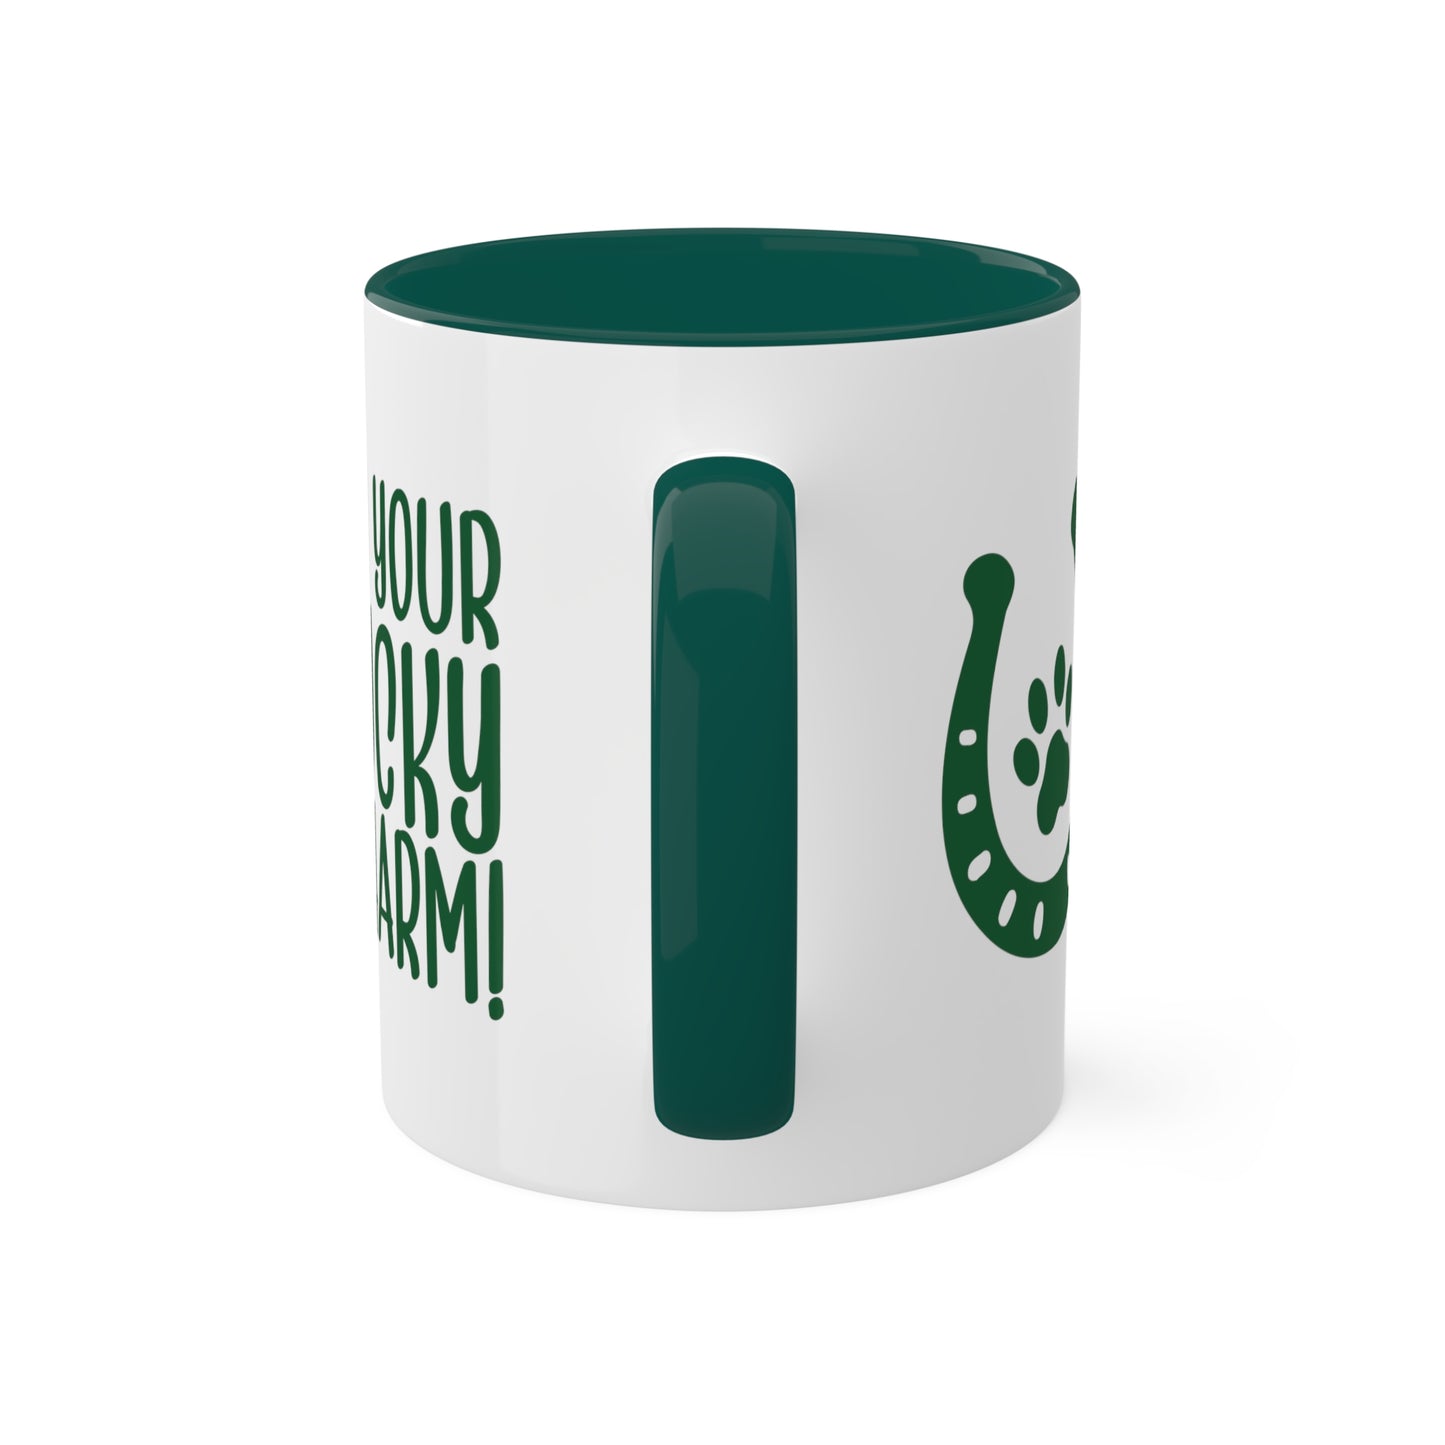 I'm Your Lucky Charm Accent Mugs, 11oz